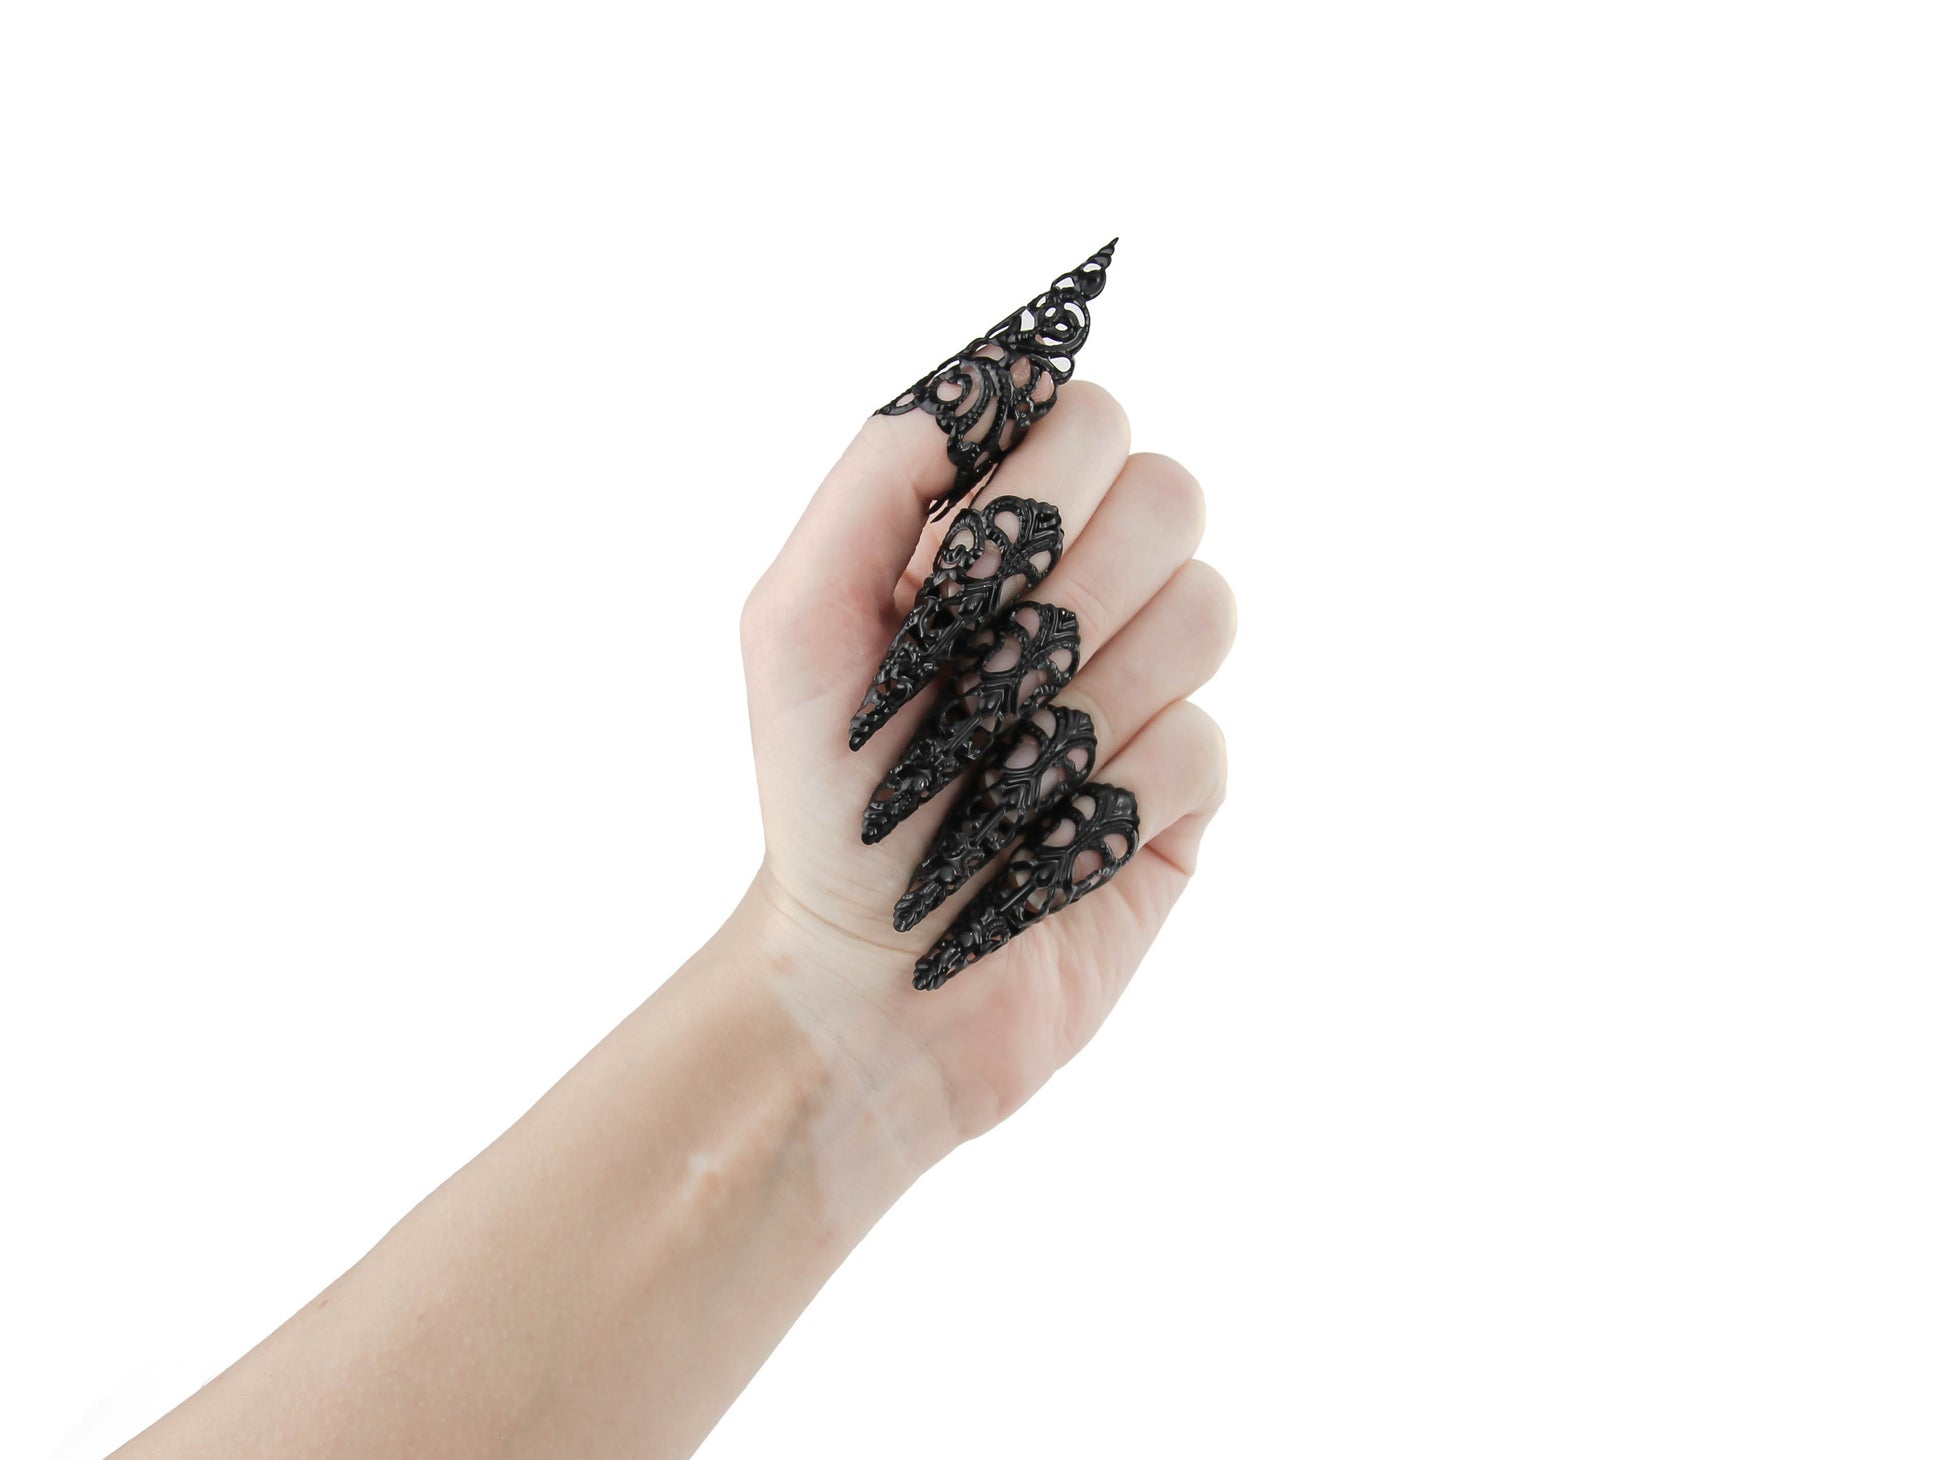 Elevate your style with Myril Jewels' long black finger claws, showcasing exquisite filigree work for a neo-gothic touch. Ideal for Halloween, these claws are a goth-chic statement, perfect for punk enthusiasts, rave parties, and those seeking bold witchcore accessories or a memorable goth girlfriend gift